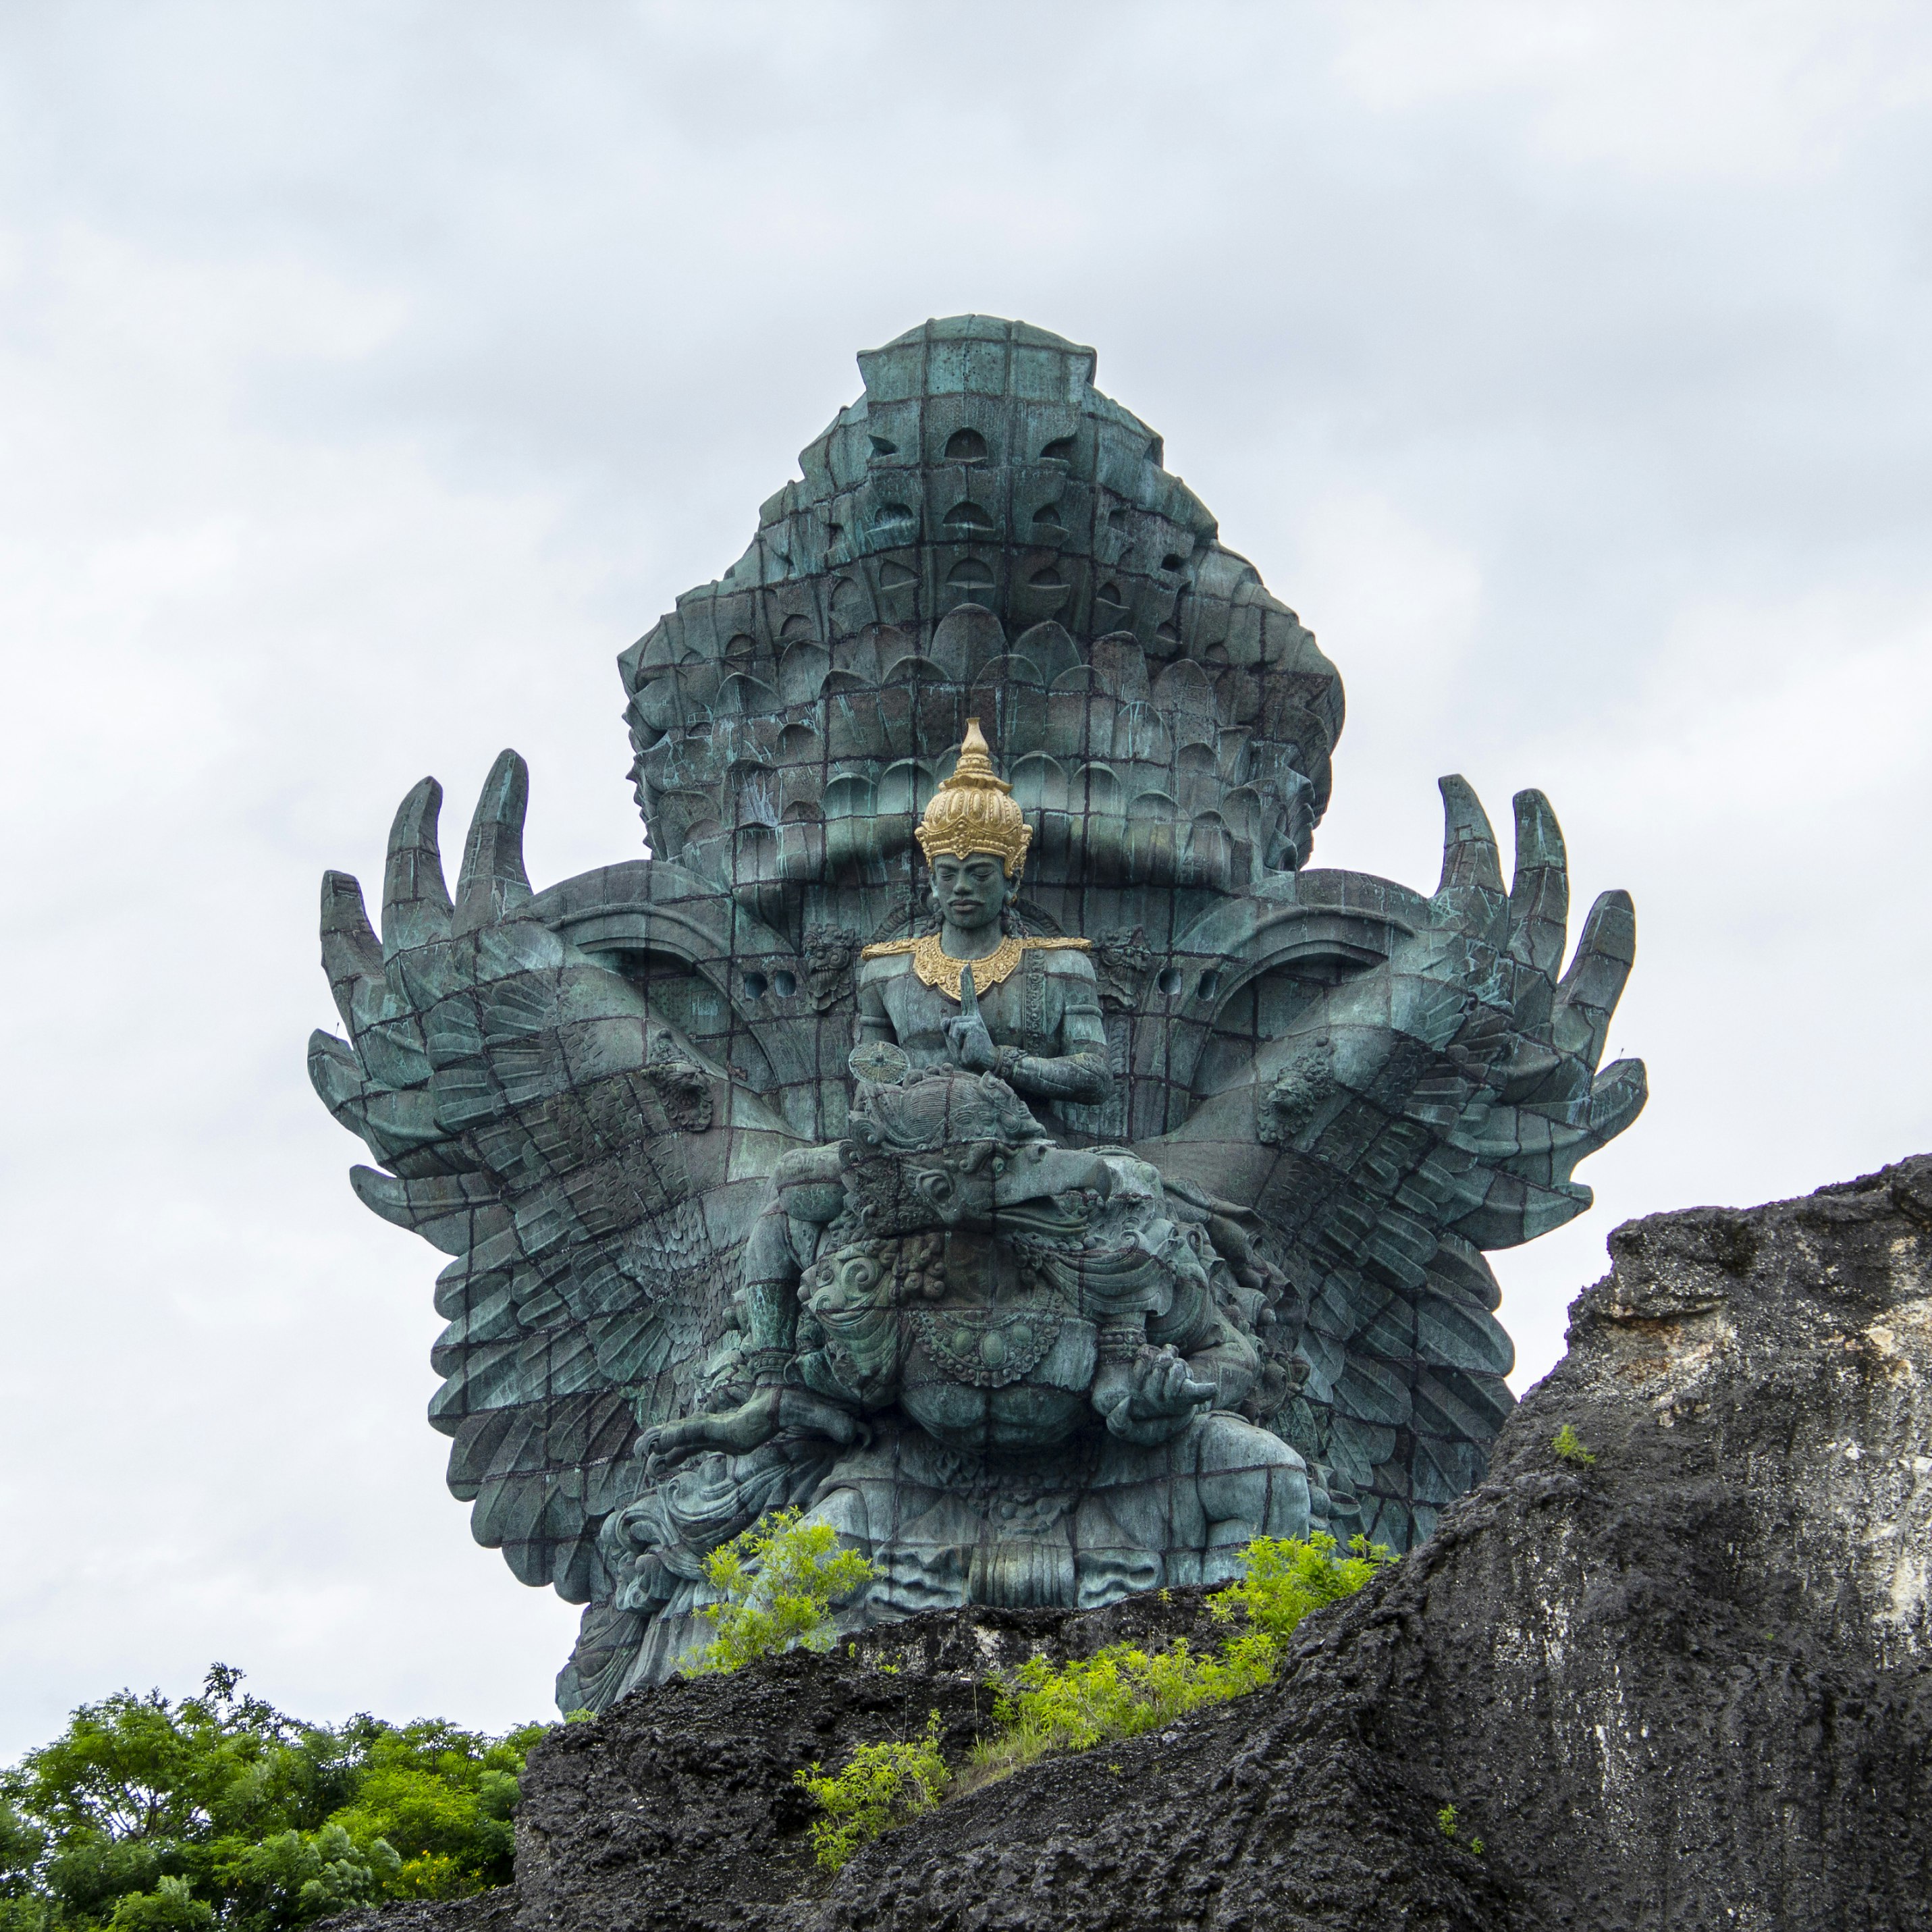 Bali, Indonesia - January 2019 - Garuda Wisnu Kencana statue towers above the rocky cliffs. Located in Garuda Wisnu Kencana Cultural Park it was designed by Nyoman Nuarta and inaugurated in September 2018, 28 years since its inception. Made of brass and copper sheeting and a wingspan of 64m ,the total height of the monument is 121 m (397ft), making it Indonesia's tallest and one of the world's largest.